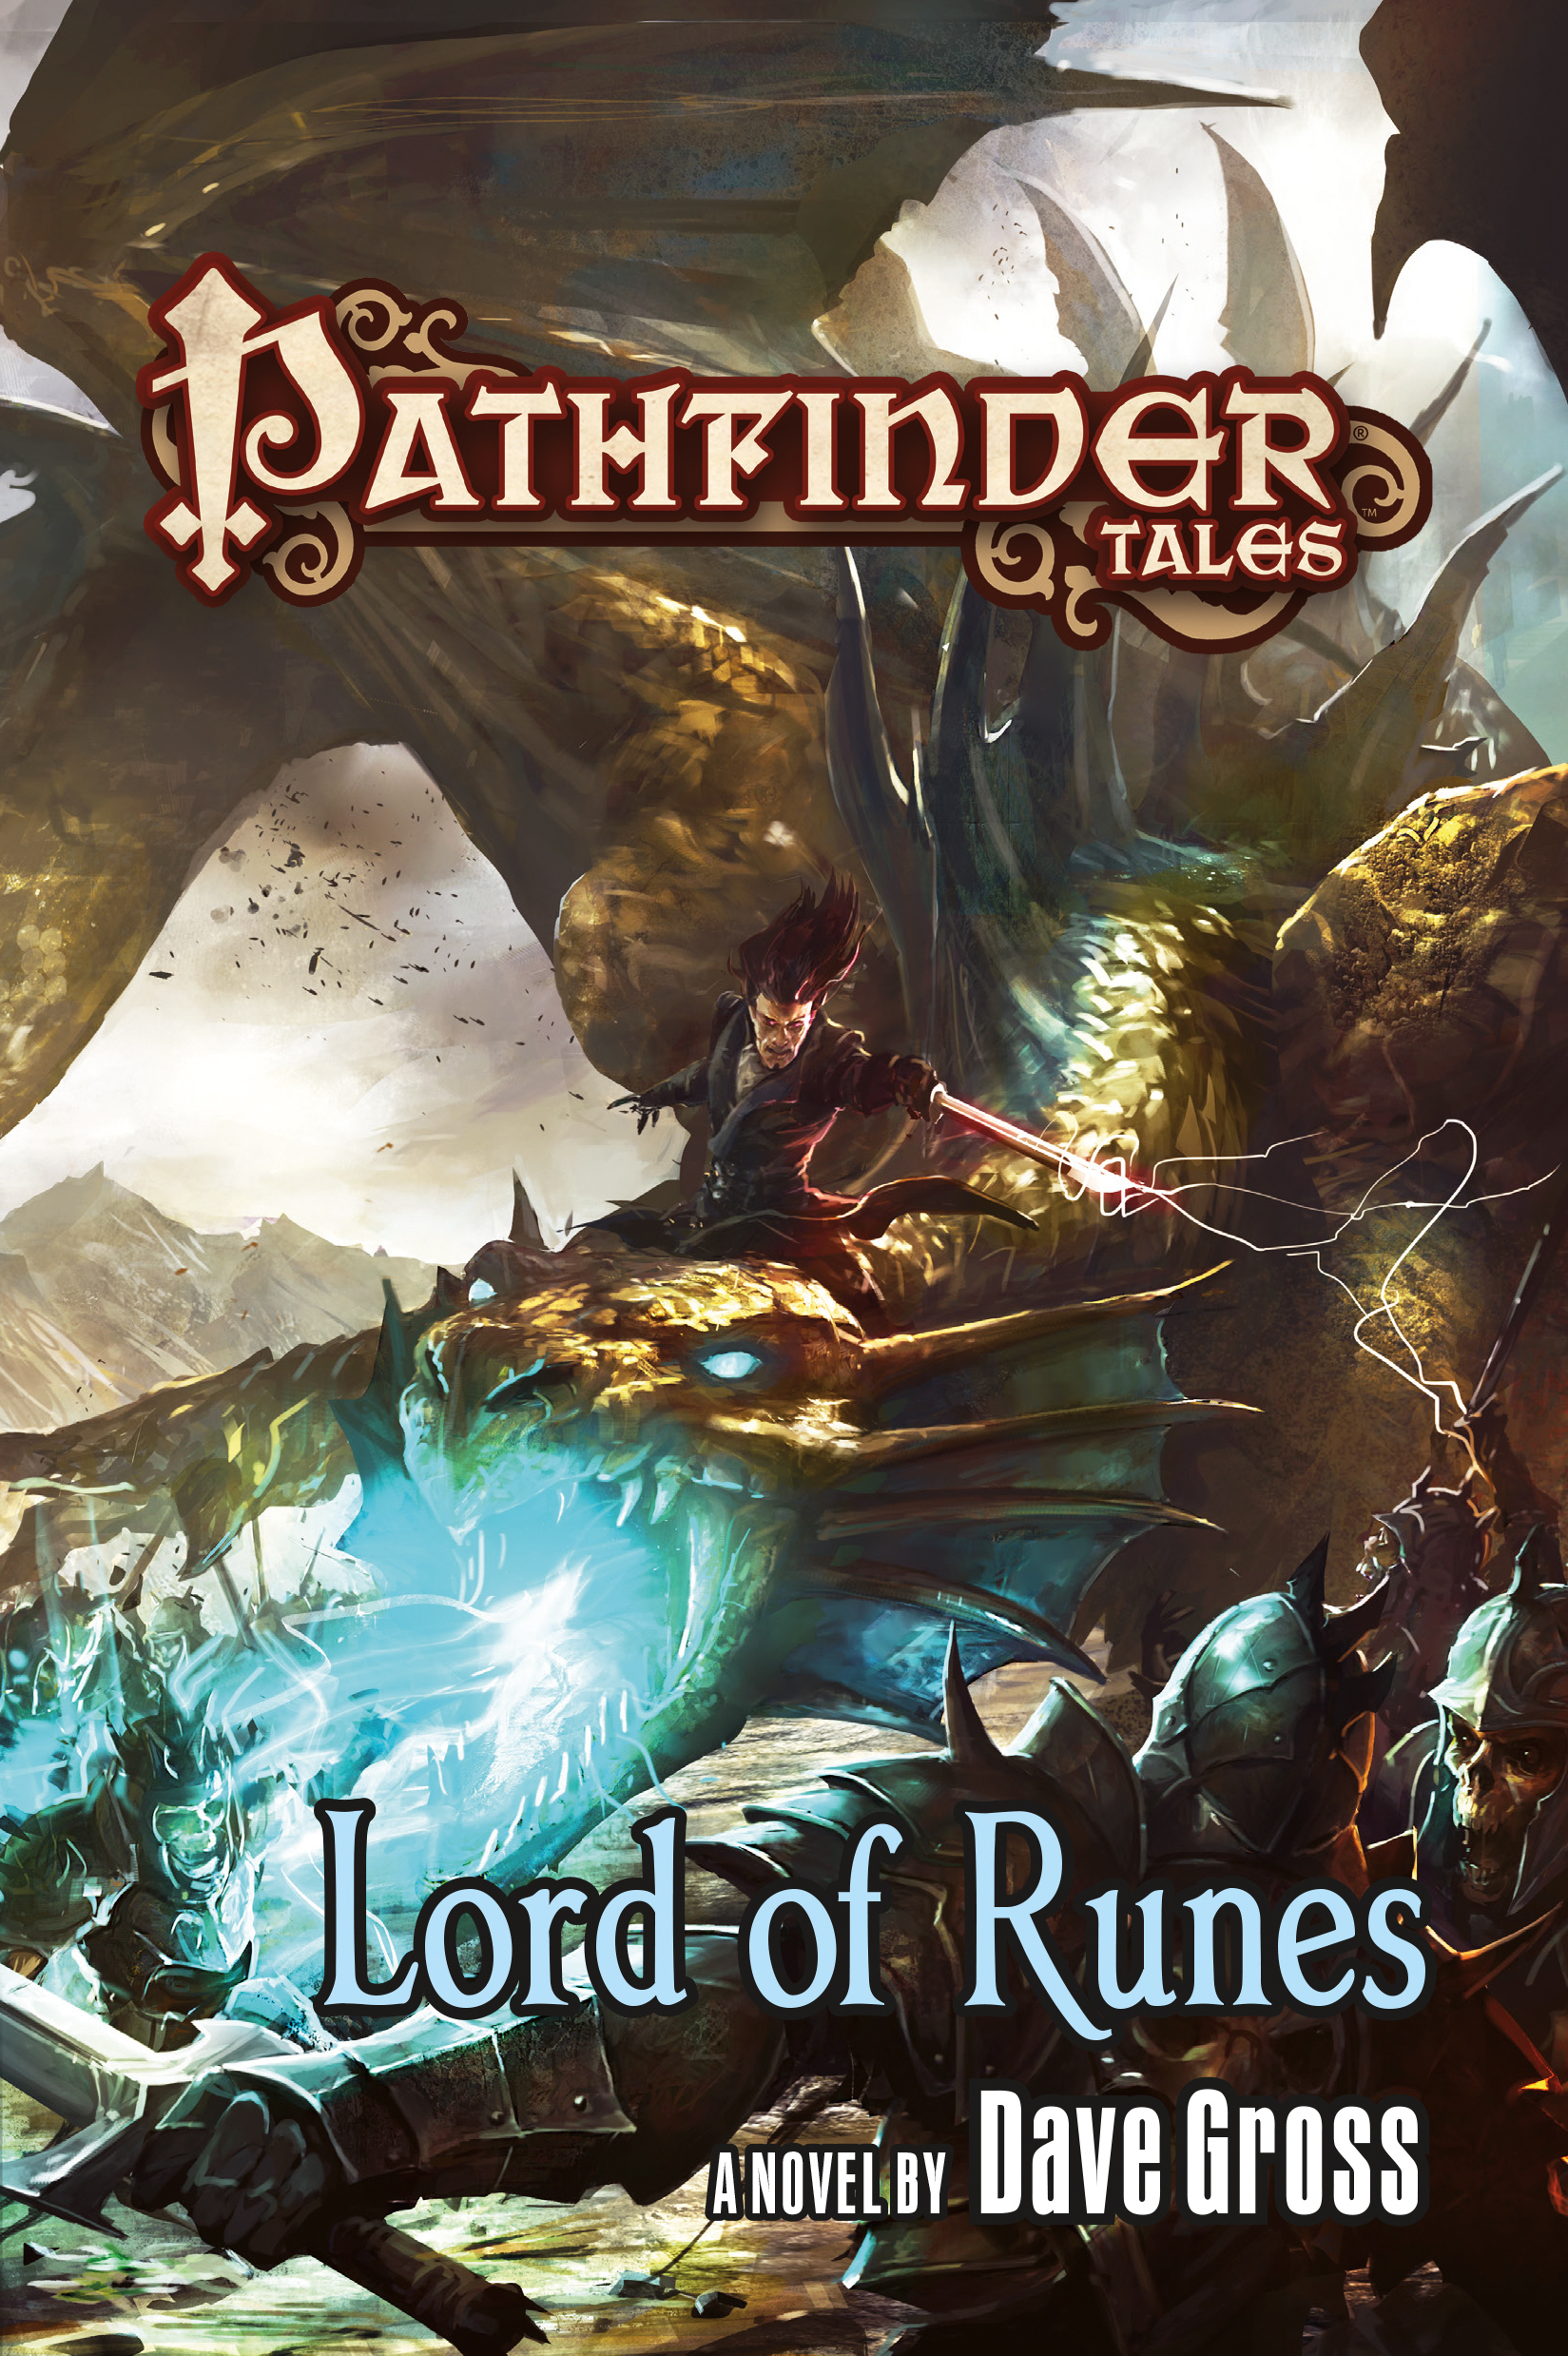 Pathfinder Tales: Lord of Runes by Dave Gross